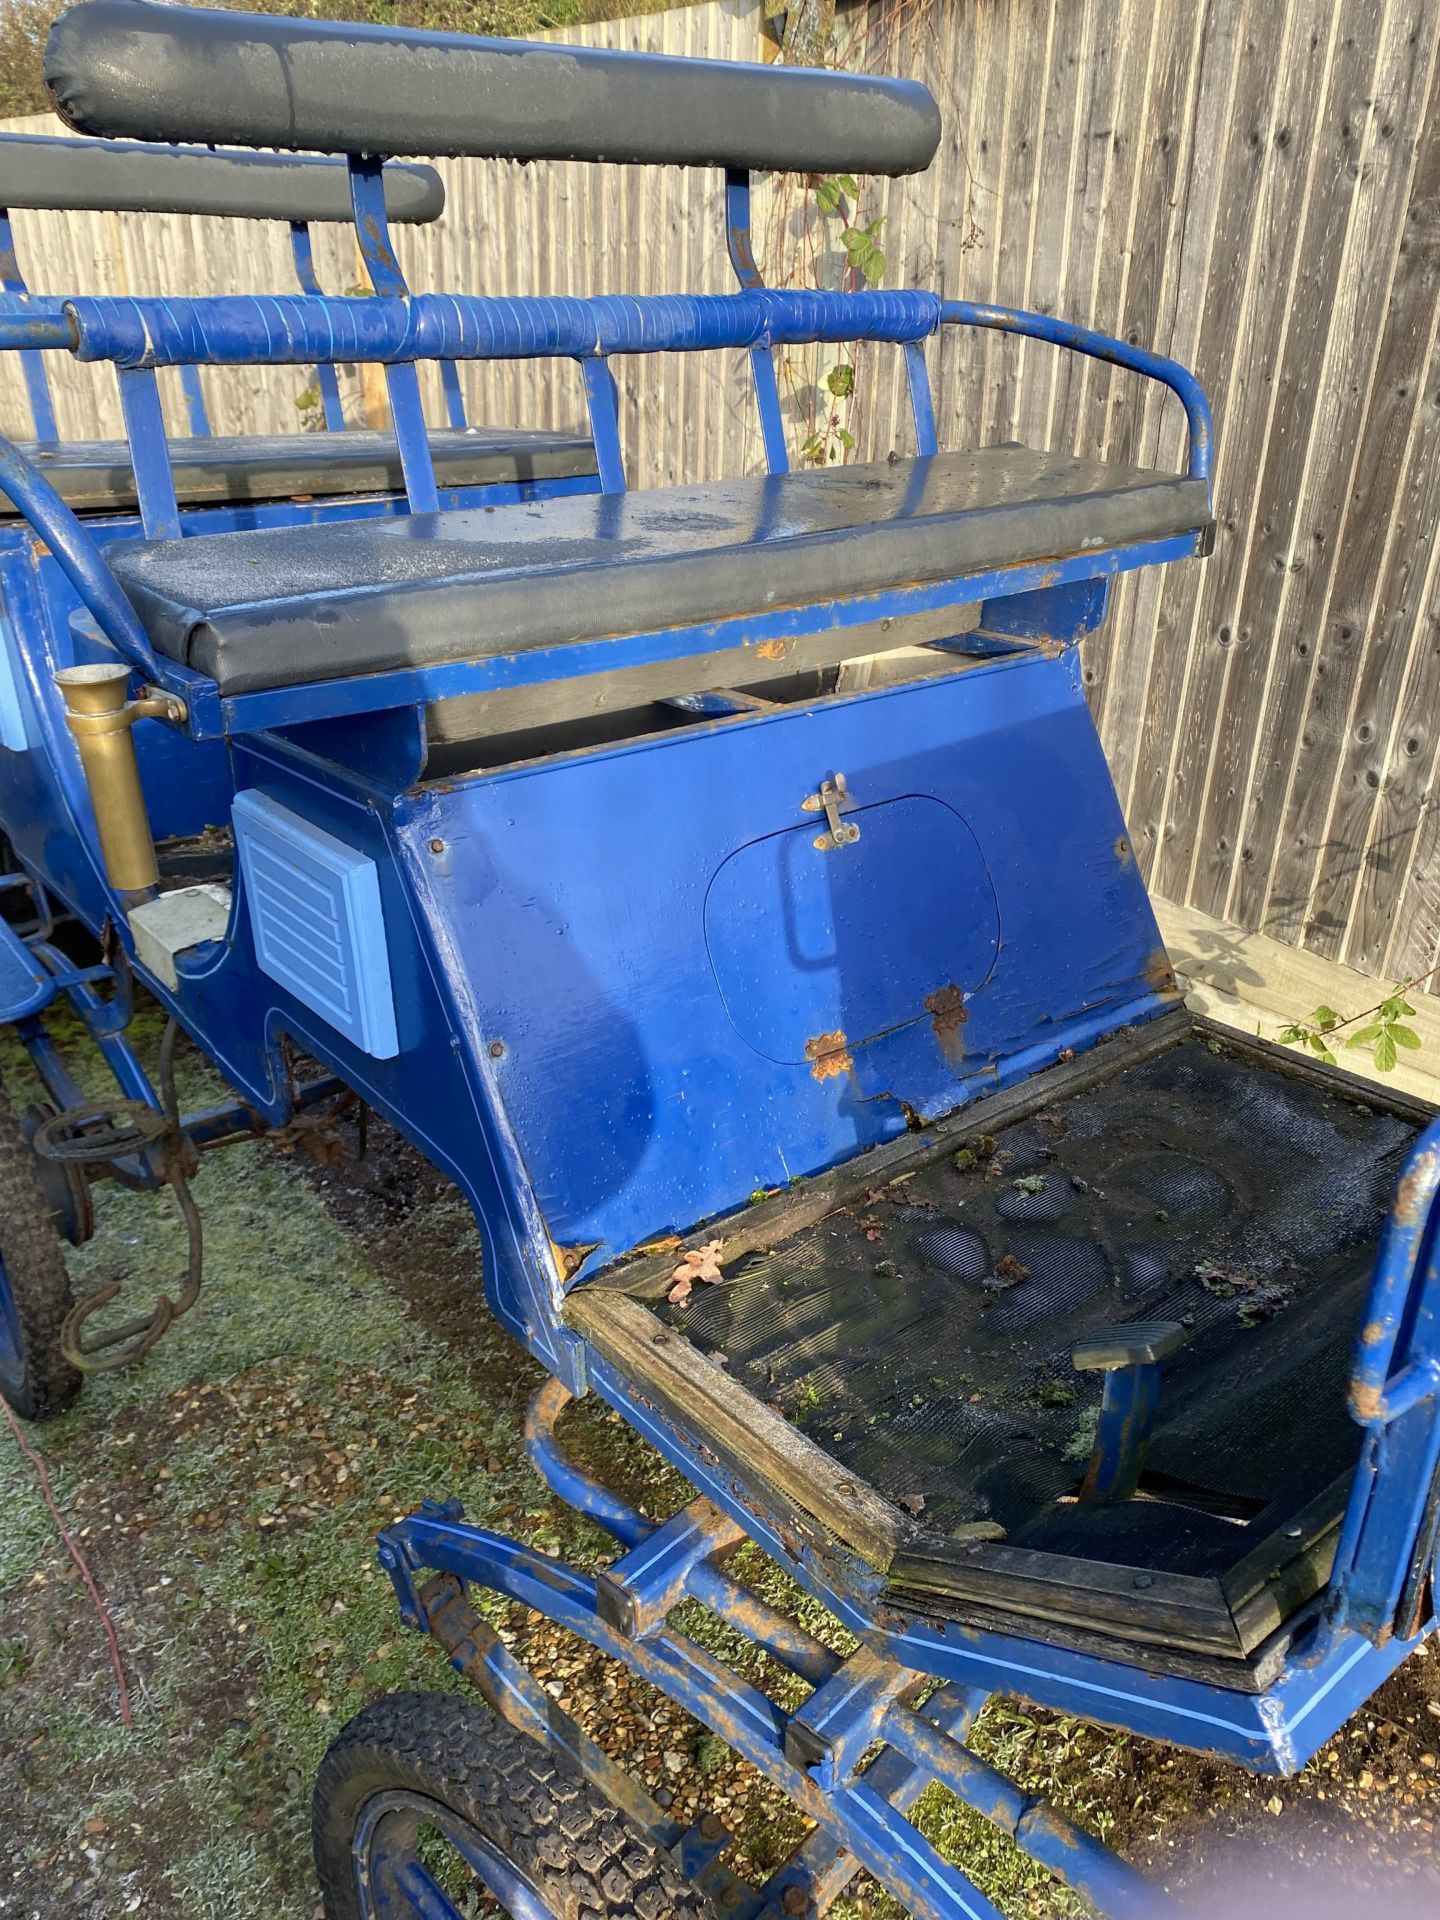 PHAETON to suit single cob. Painted Royal blue with light blue lining, the 2 rows of seats and - Bild 4 aus 5